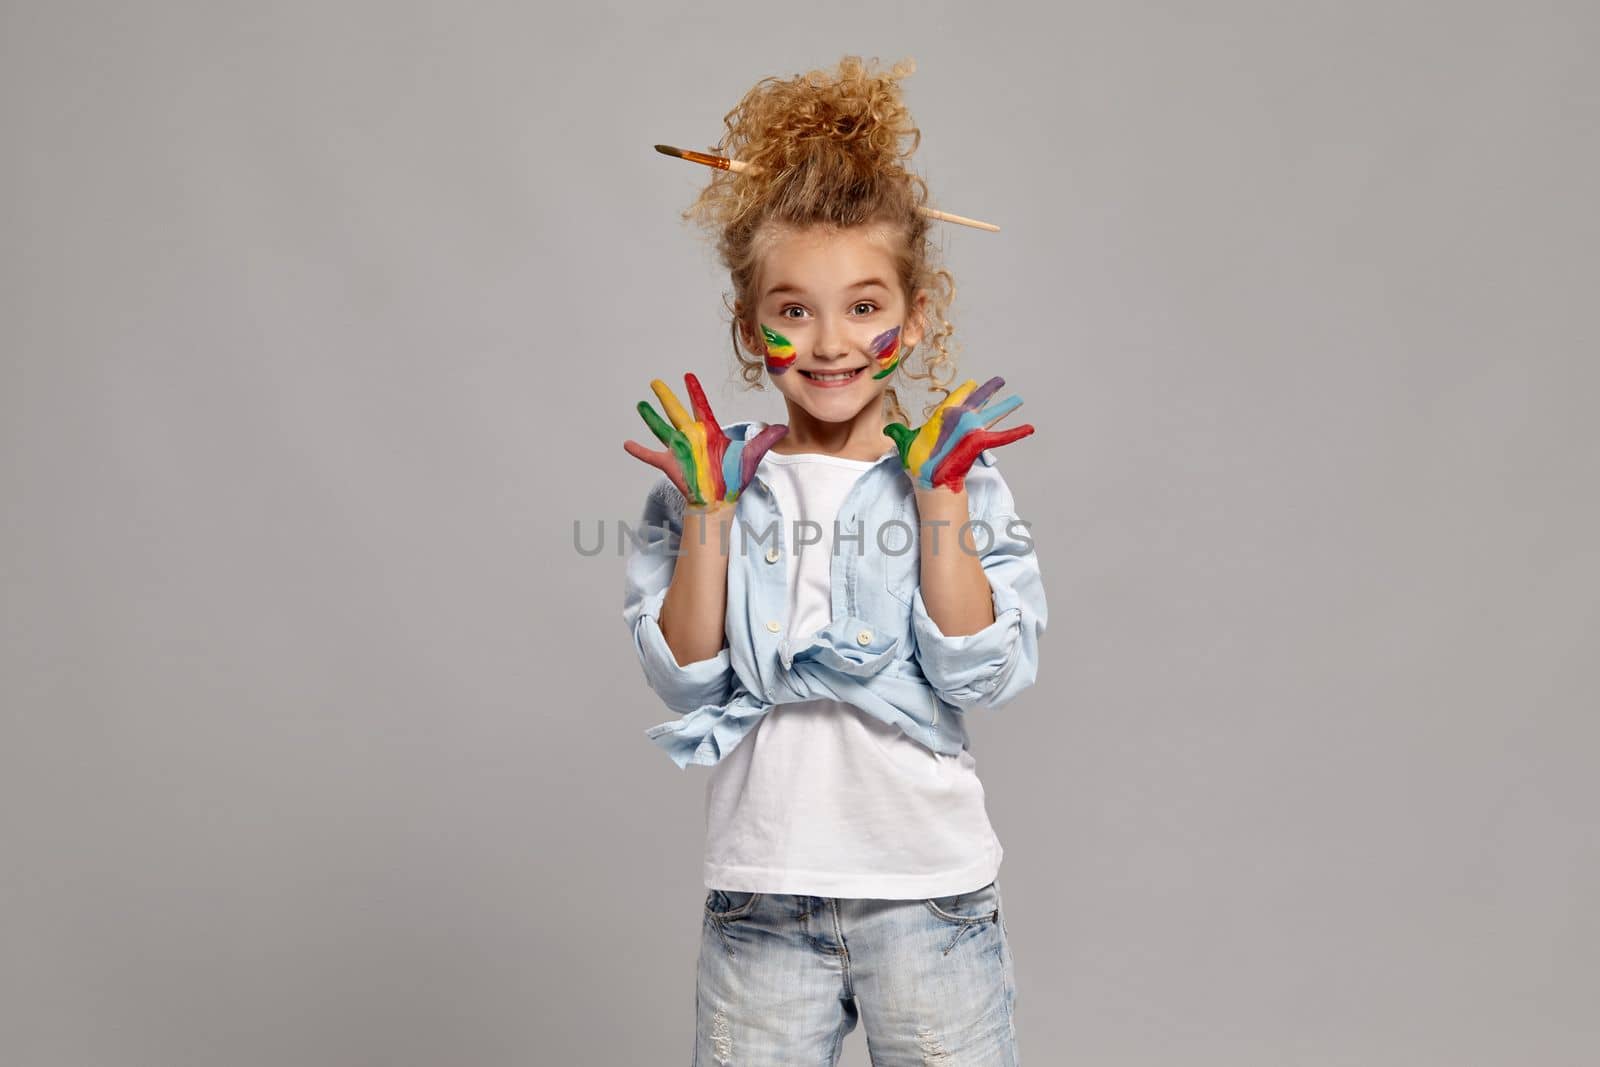 Lovely kid having a brush in her chic hairstyle, wearing in a blue shirt and white t-shirt. She raised her painted hands up, smiling and looking at the camera, on a gray background.